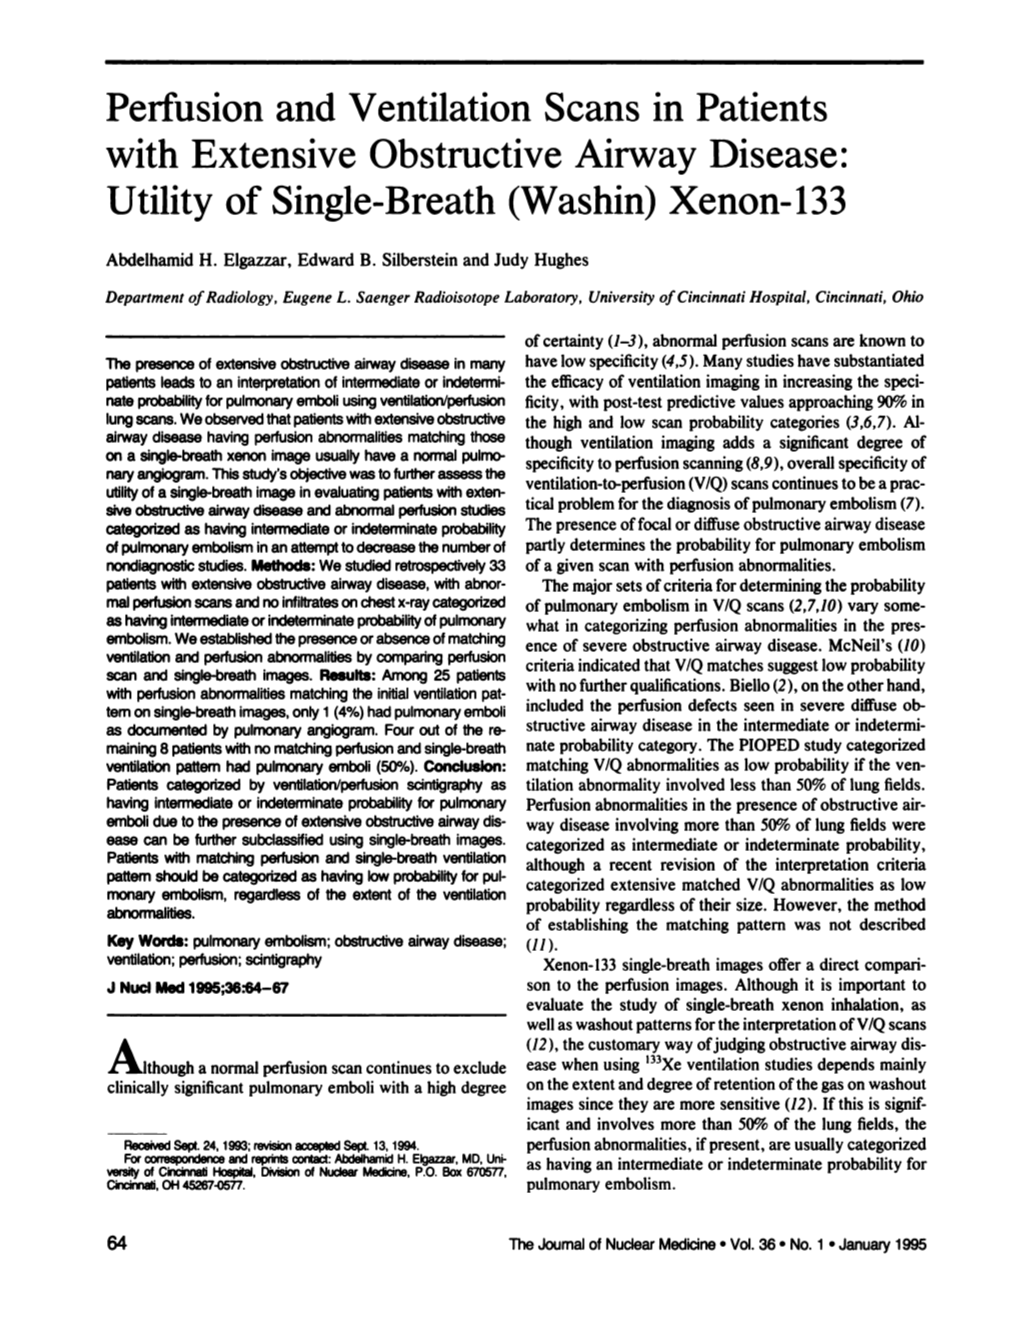 Perfusion and Ventilation Scans in Patients with Extensive Obstructive Airway Disease: Utility of Single-Breath (Washin) Xenon-133